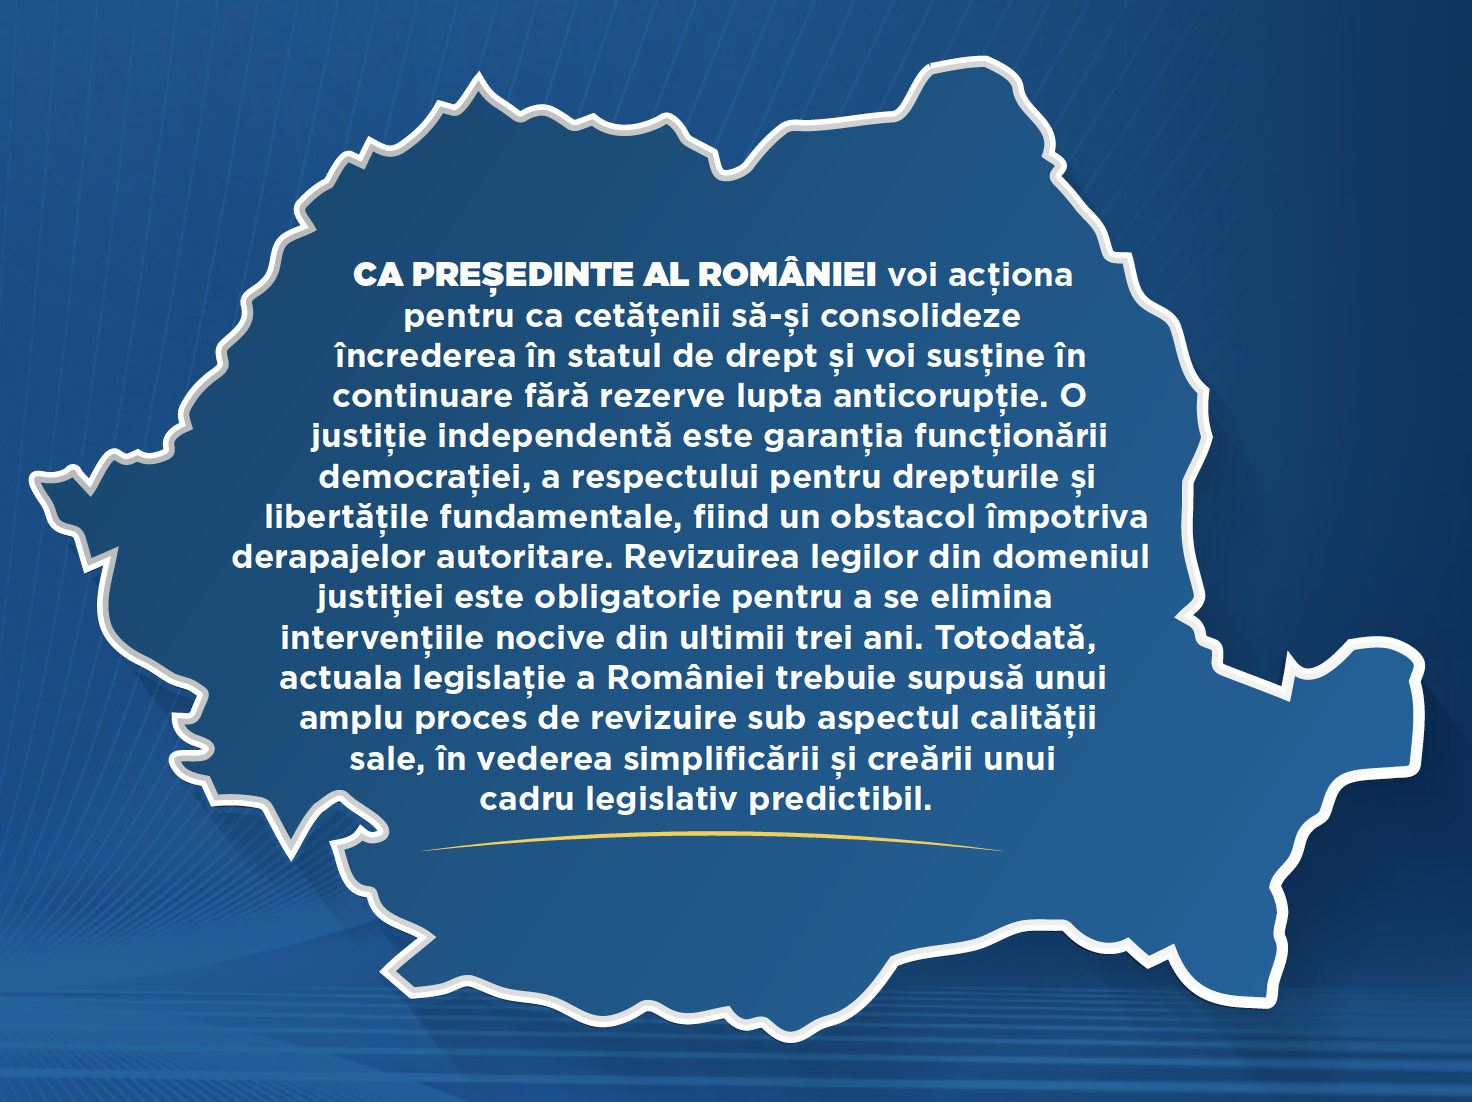 Iohannis' presidential programme